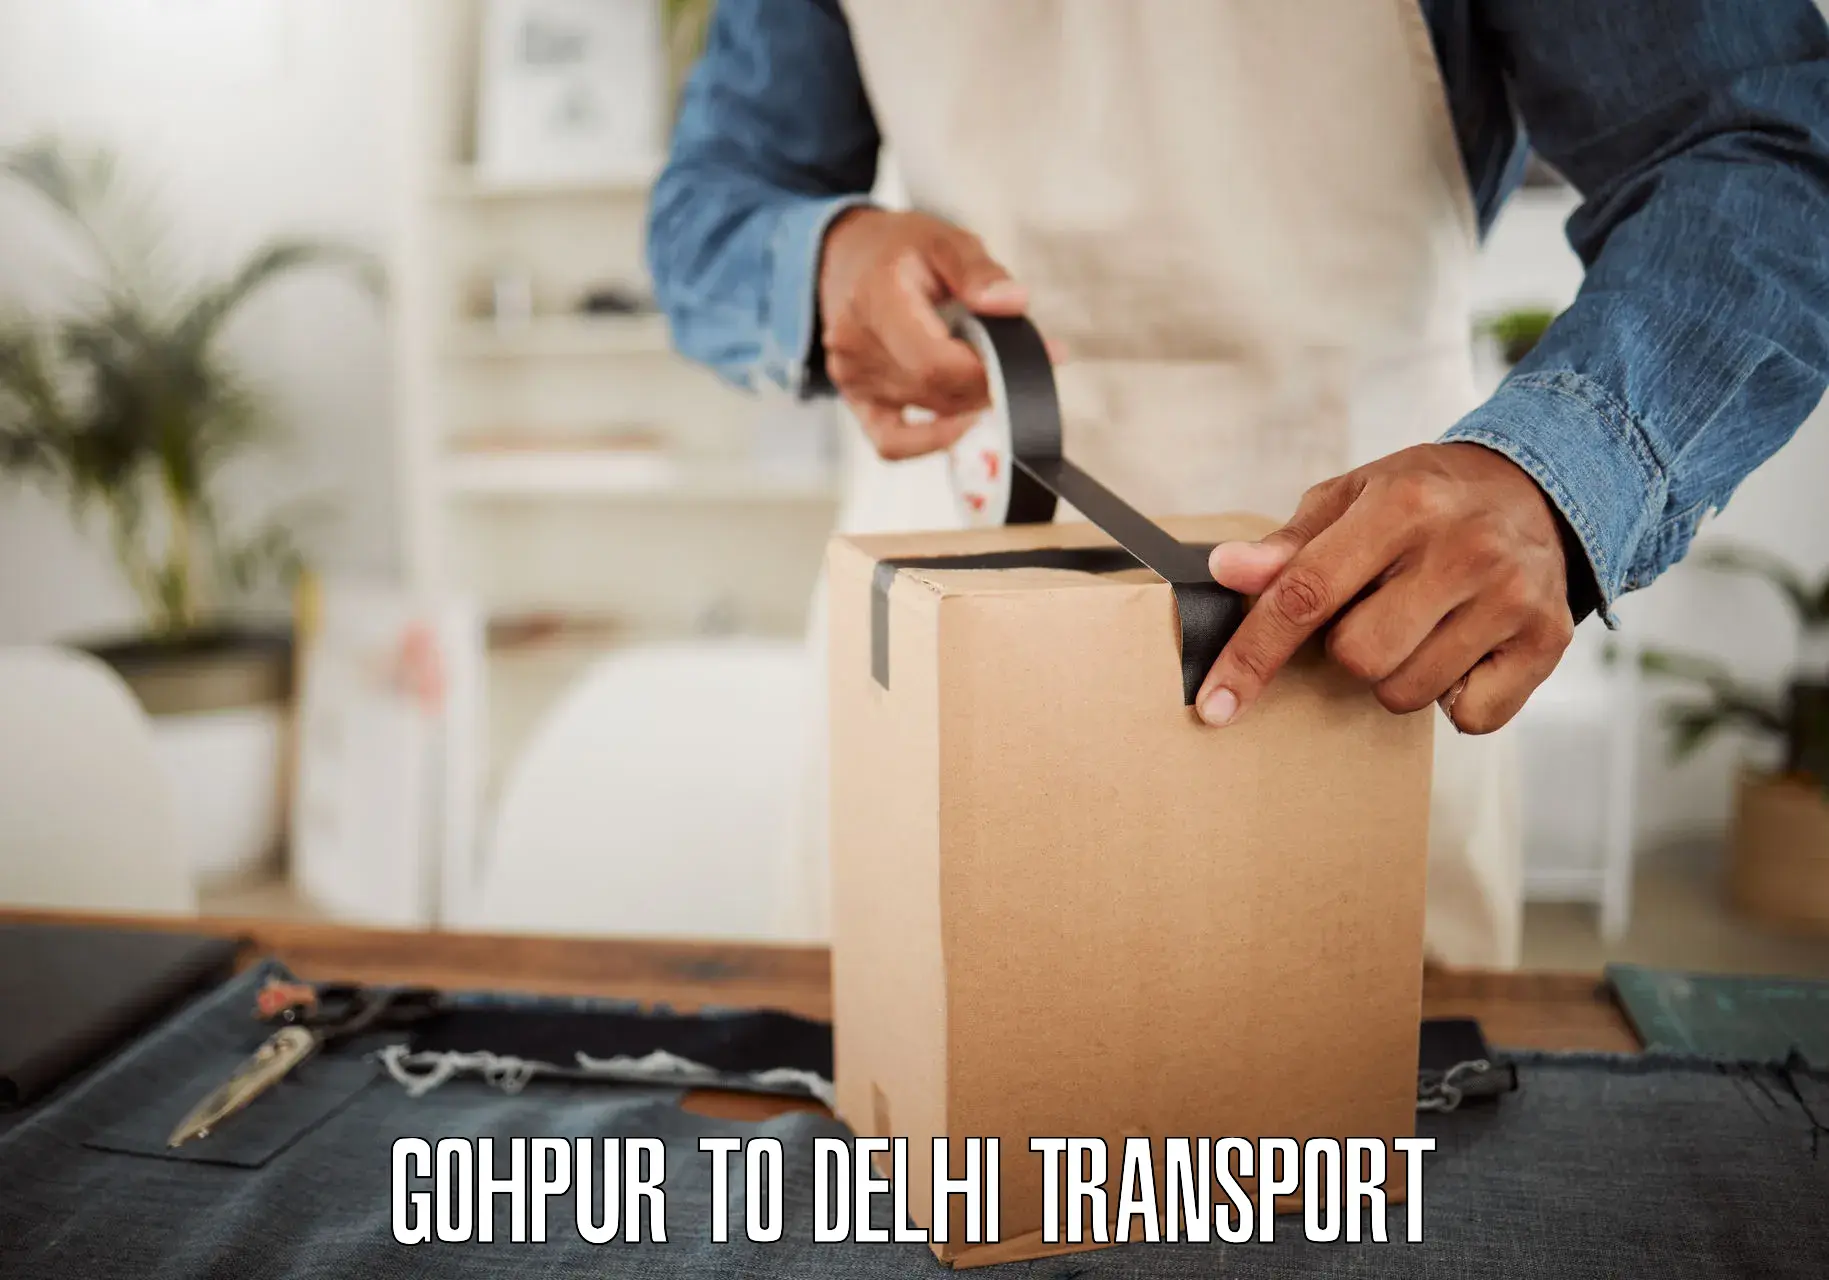 Daily transport service Gohpur to East Delhi